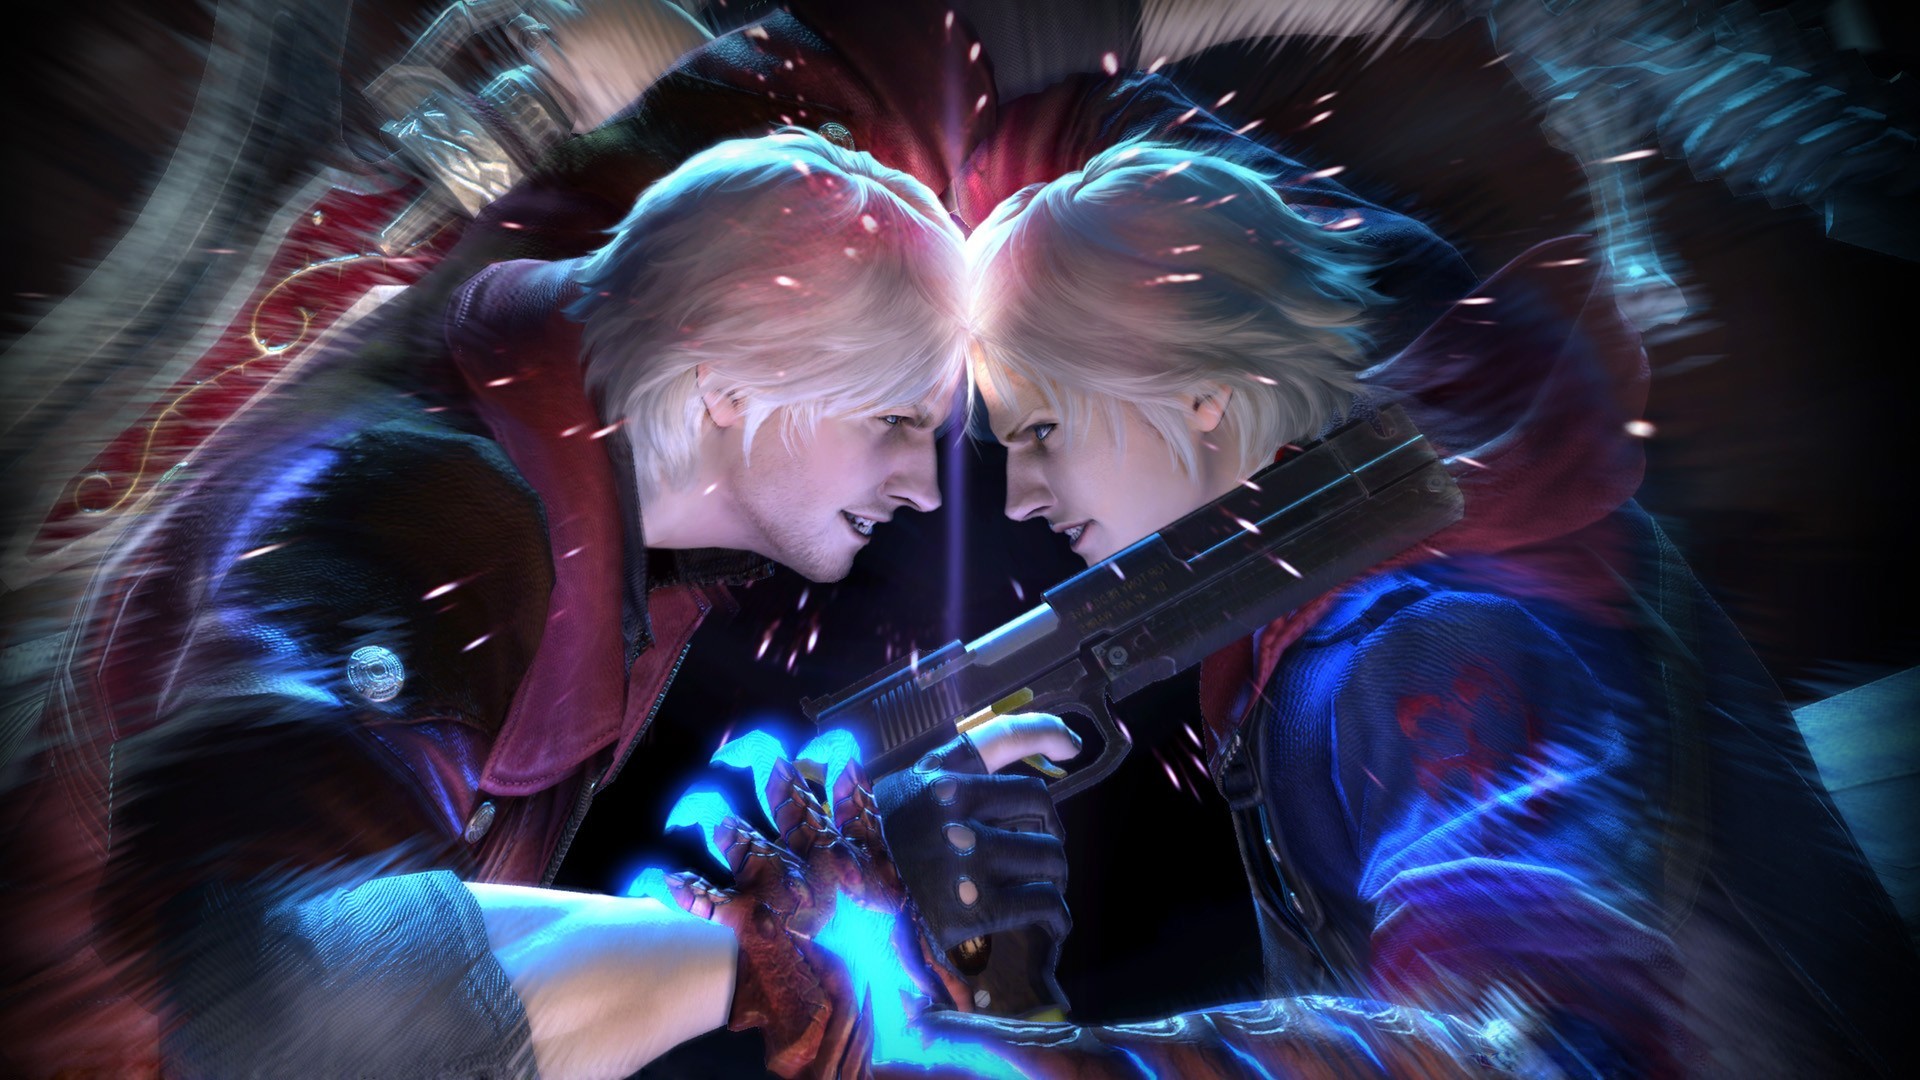 Vergil DLC coming to Devil May Cry 5 on PS4 and Xbox One